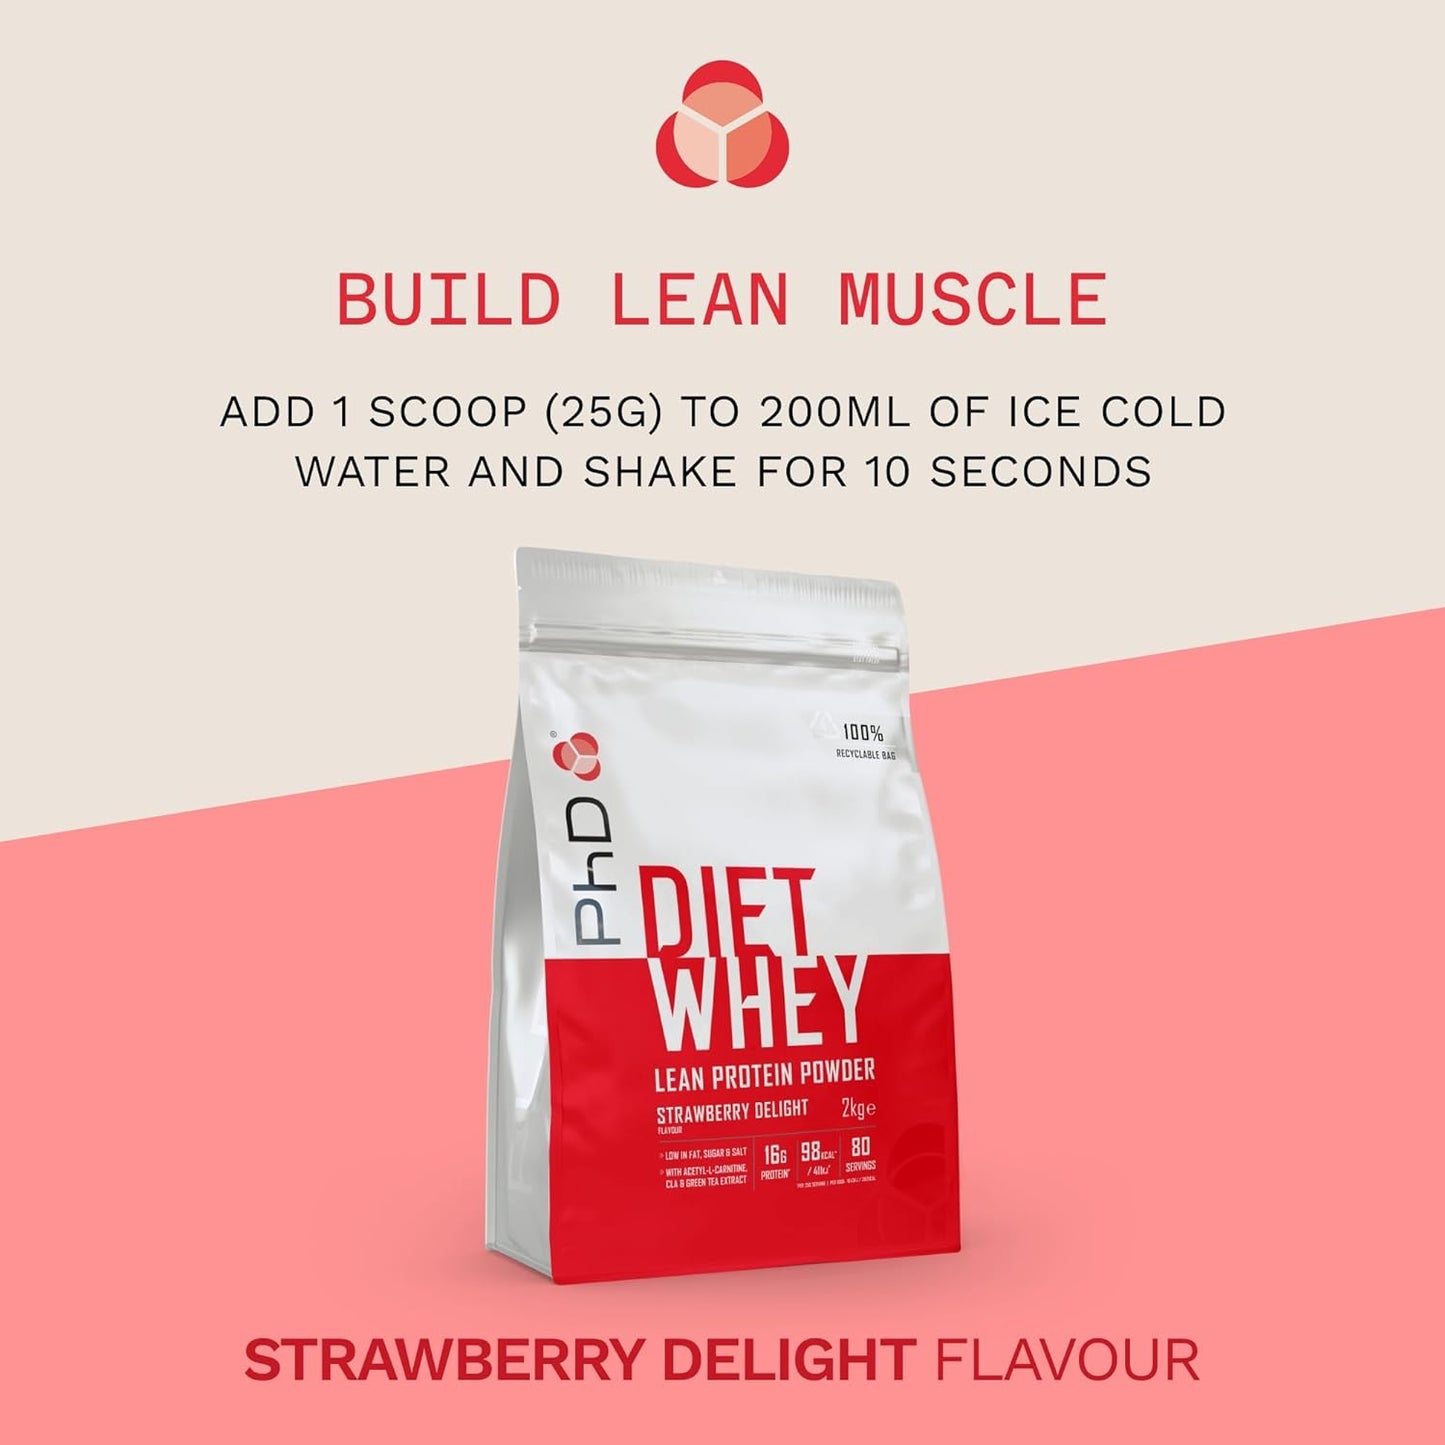 Nutrition Diet Whey Low Calorie Protein Powder, Low Carb, High Protein Lean Matrix, Strawberry Delight Diet Whey Protein Powder, High Protein, 80 Servings per 2 Kg Bag